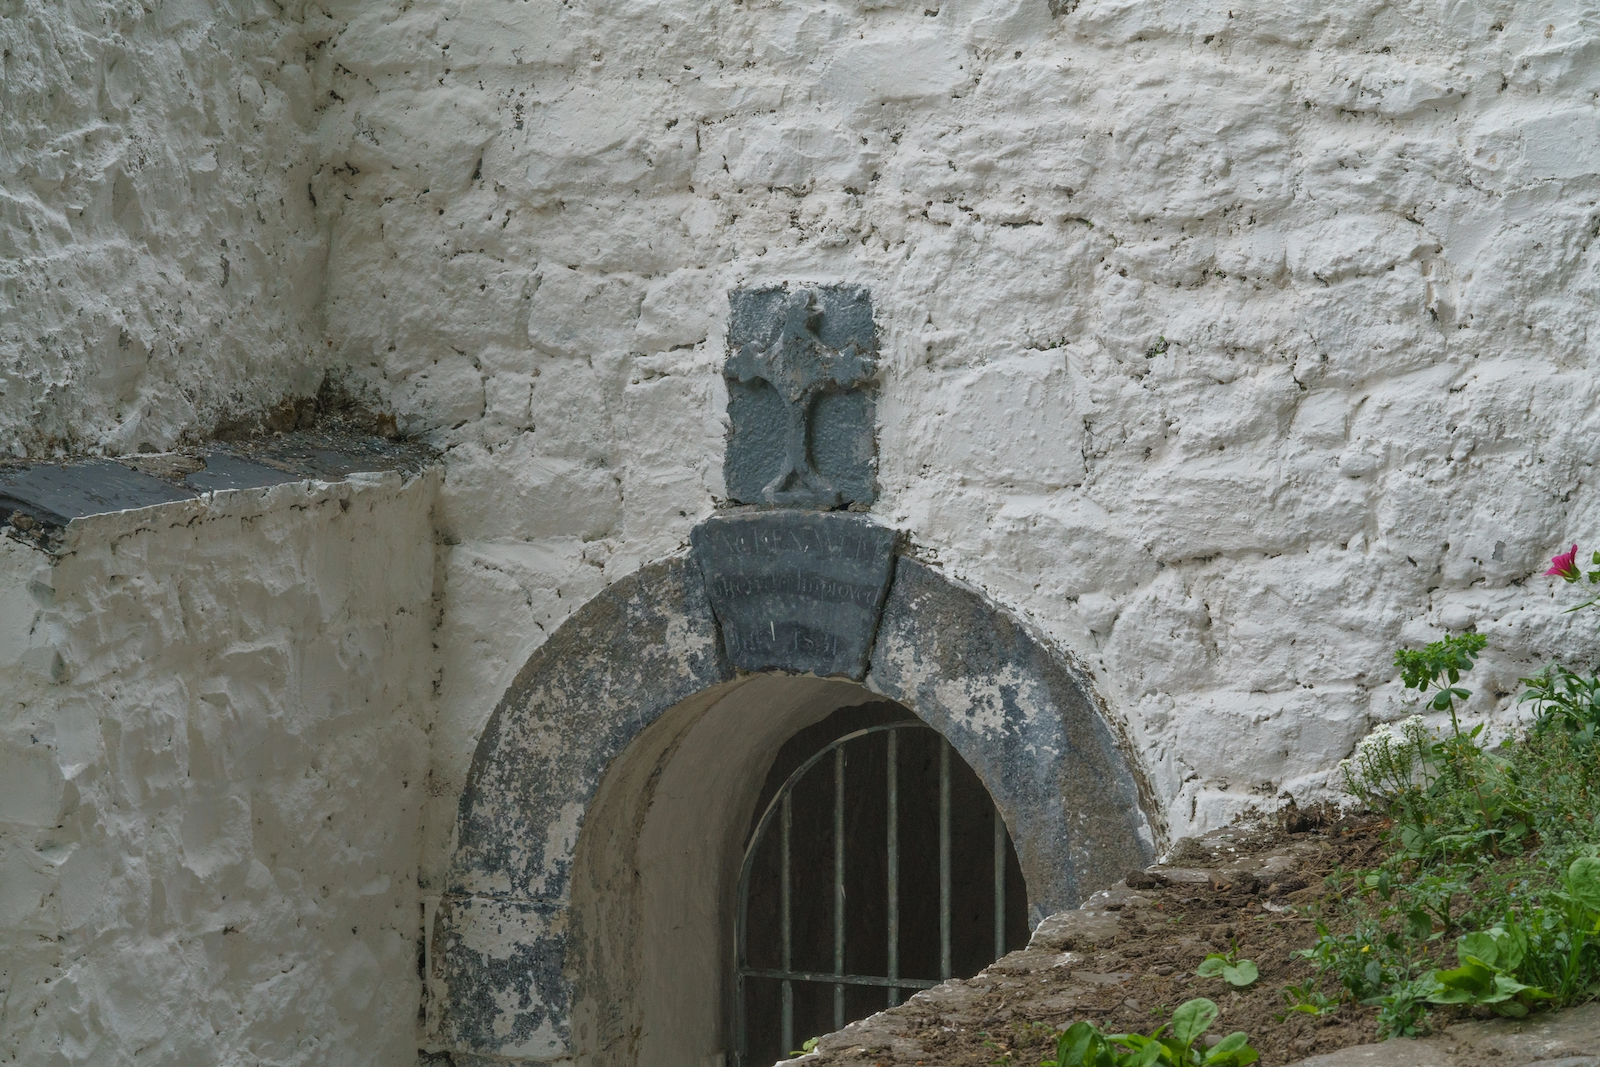 my-search-for-holy-wells-in-kilkenny-has-not-gone-well-[this-is-lacken-well-and-it-is-at-least-two-hundred-years-old]-227102-001